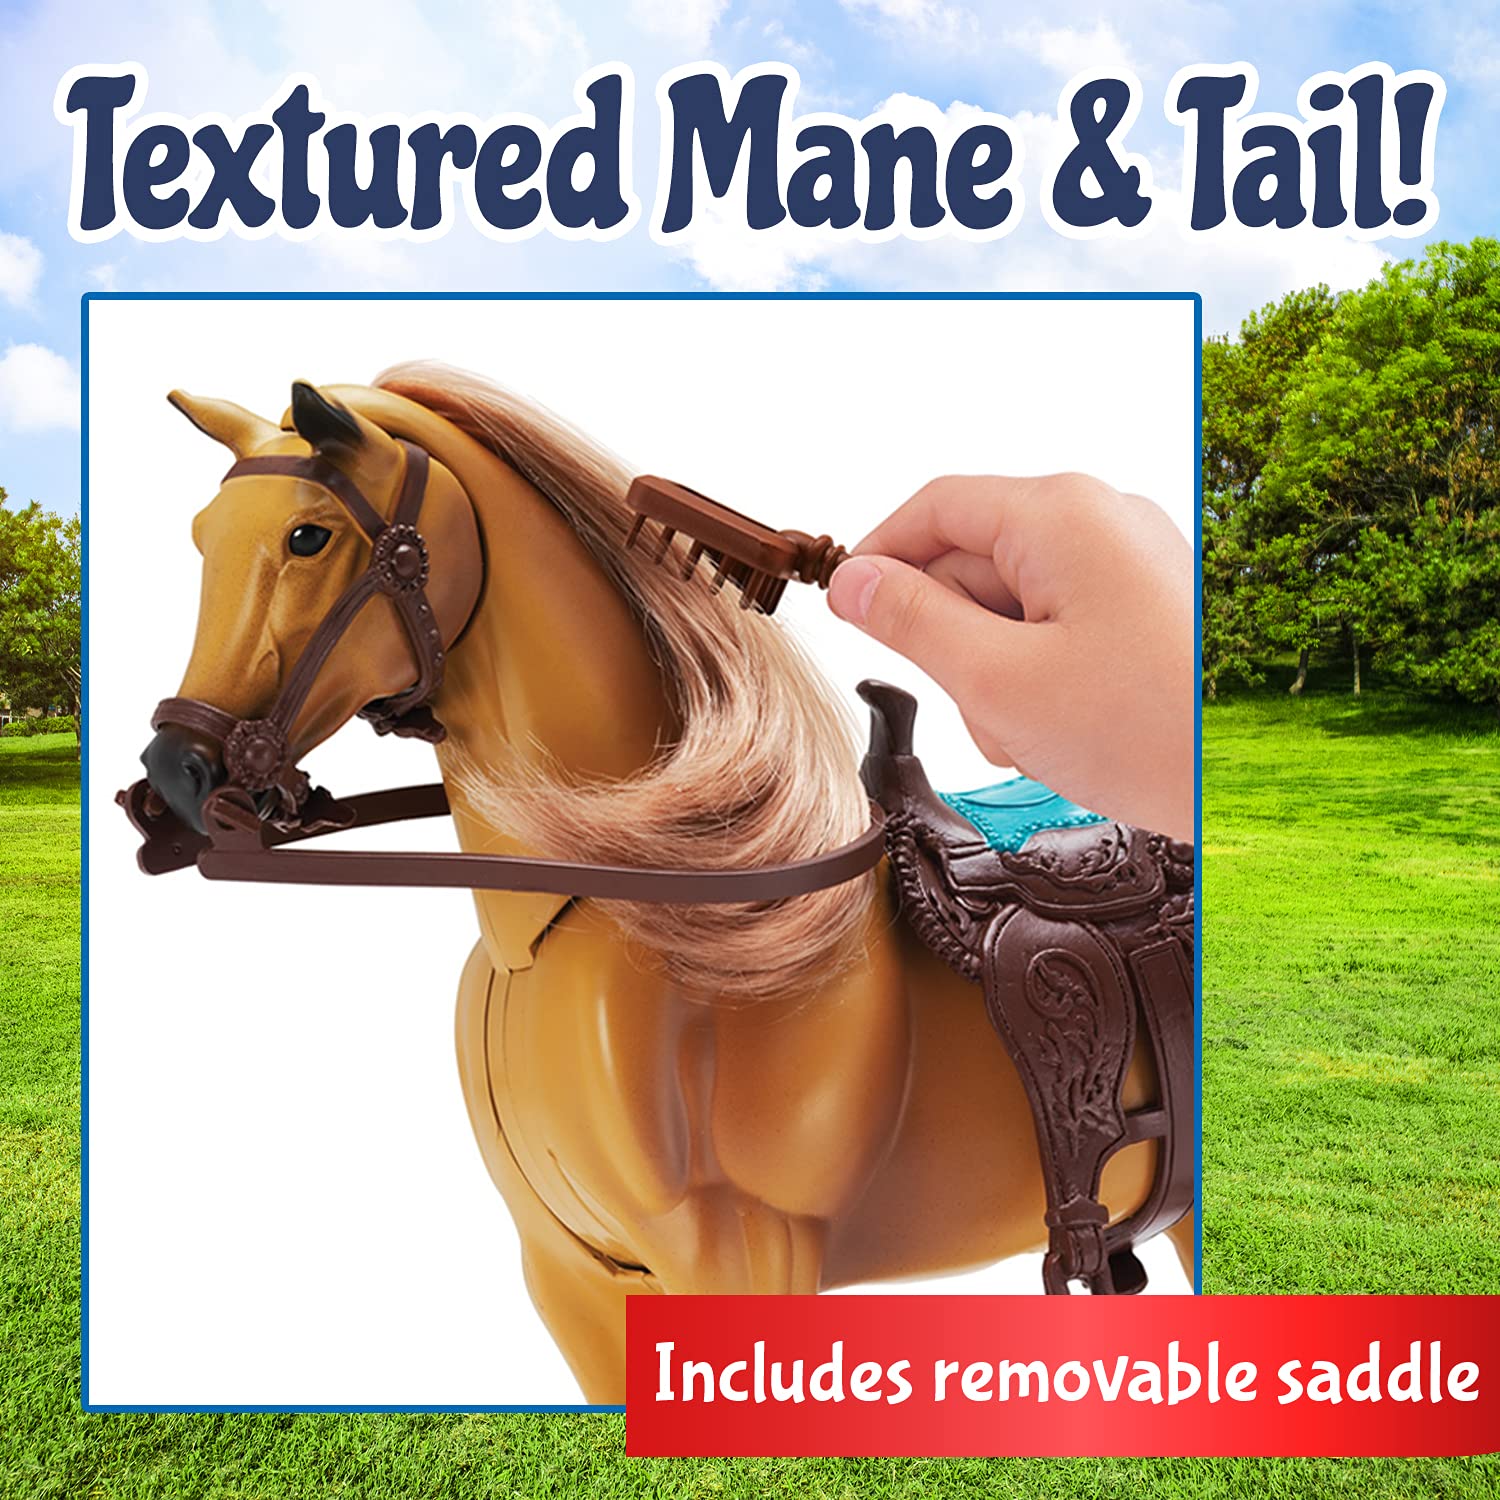 Sunny Days Entertainment | Quarter Horse with Moveable Head, Realistic Sound and 14 Grooming Accessories | Blue Ribbon Champions Deluxe Toy Horses